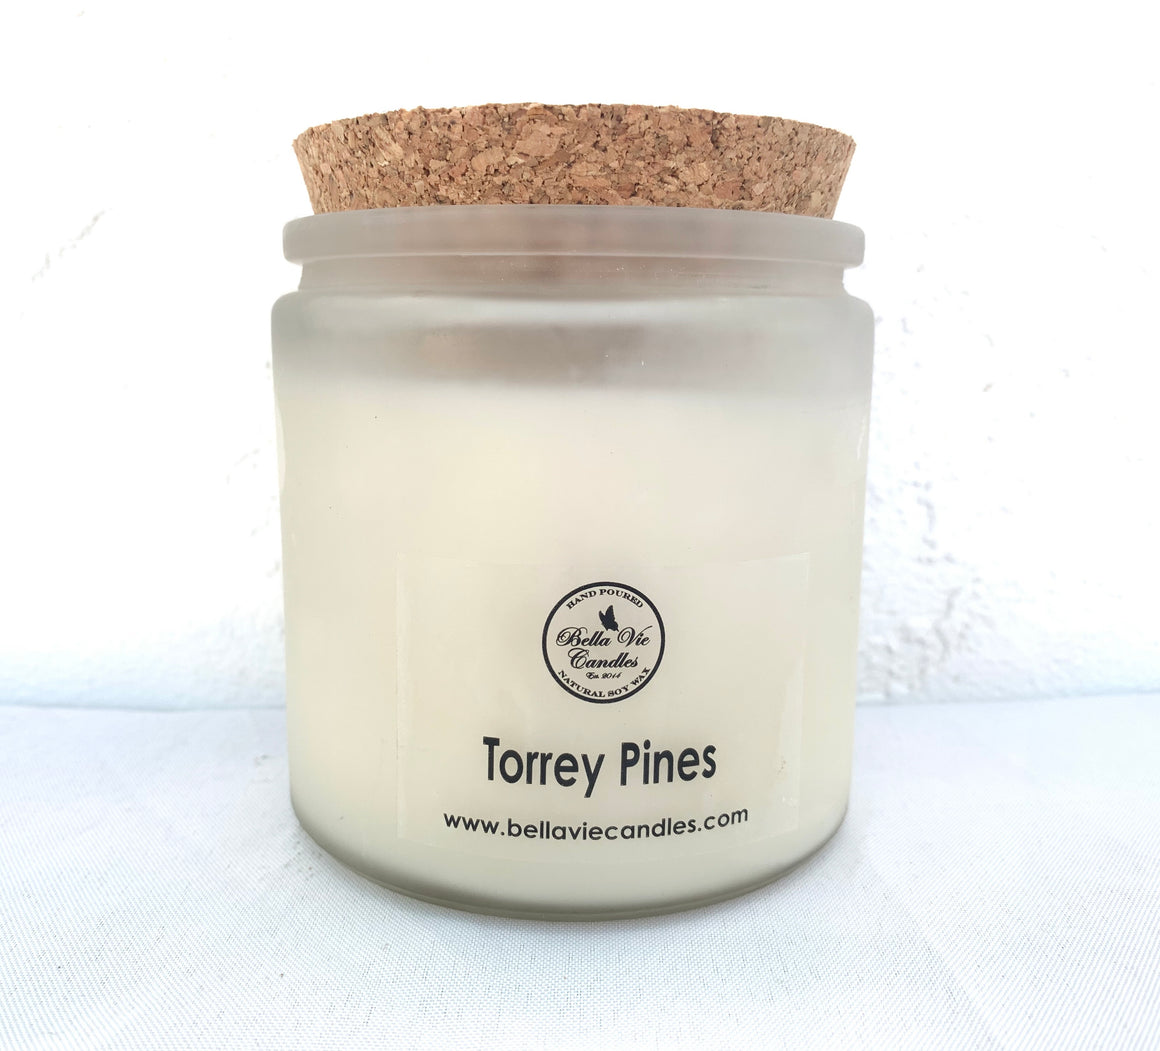 Torrey Pines Soy candle